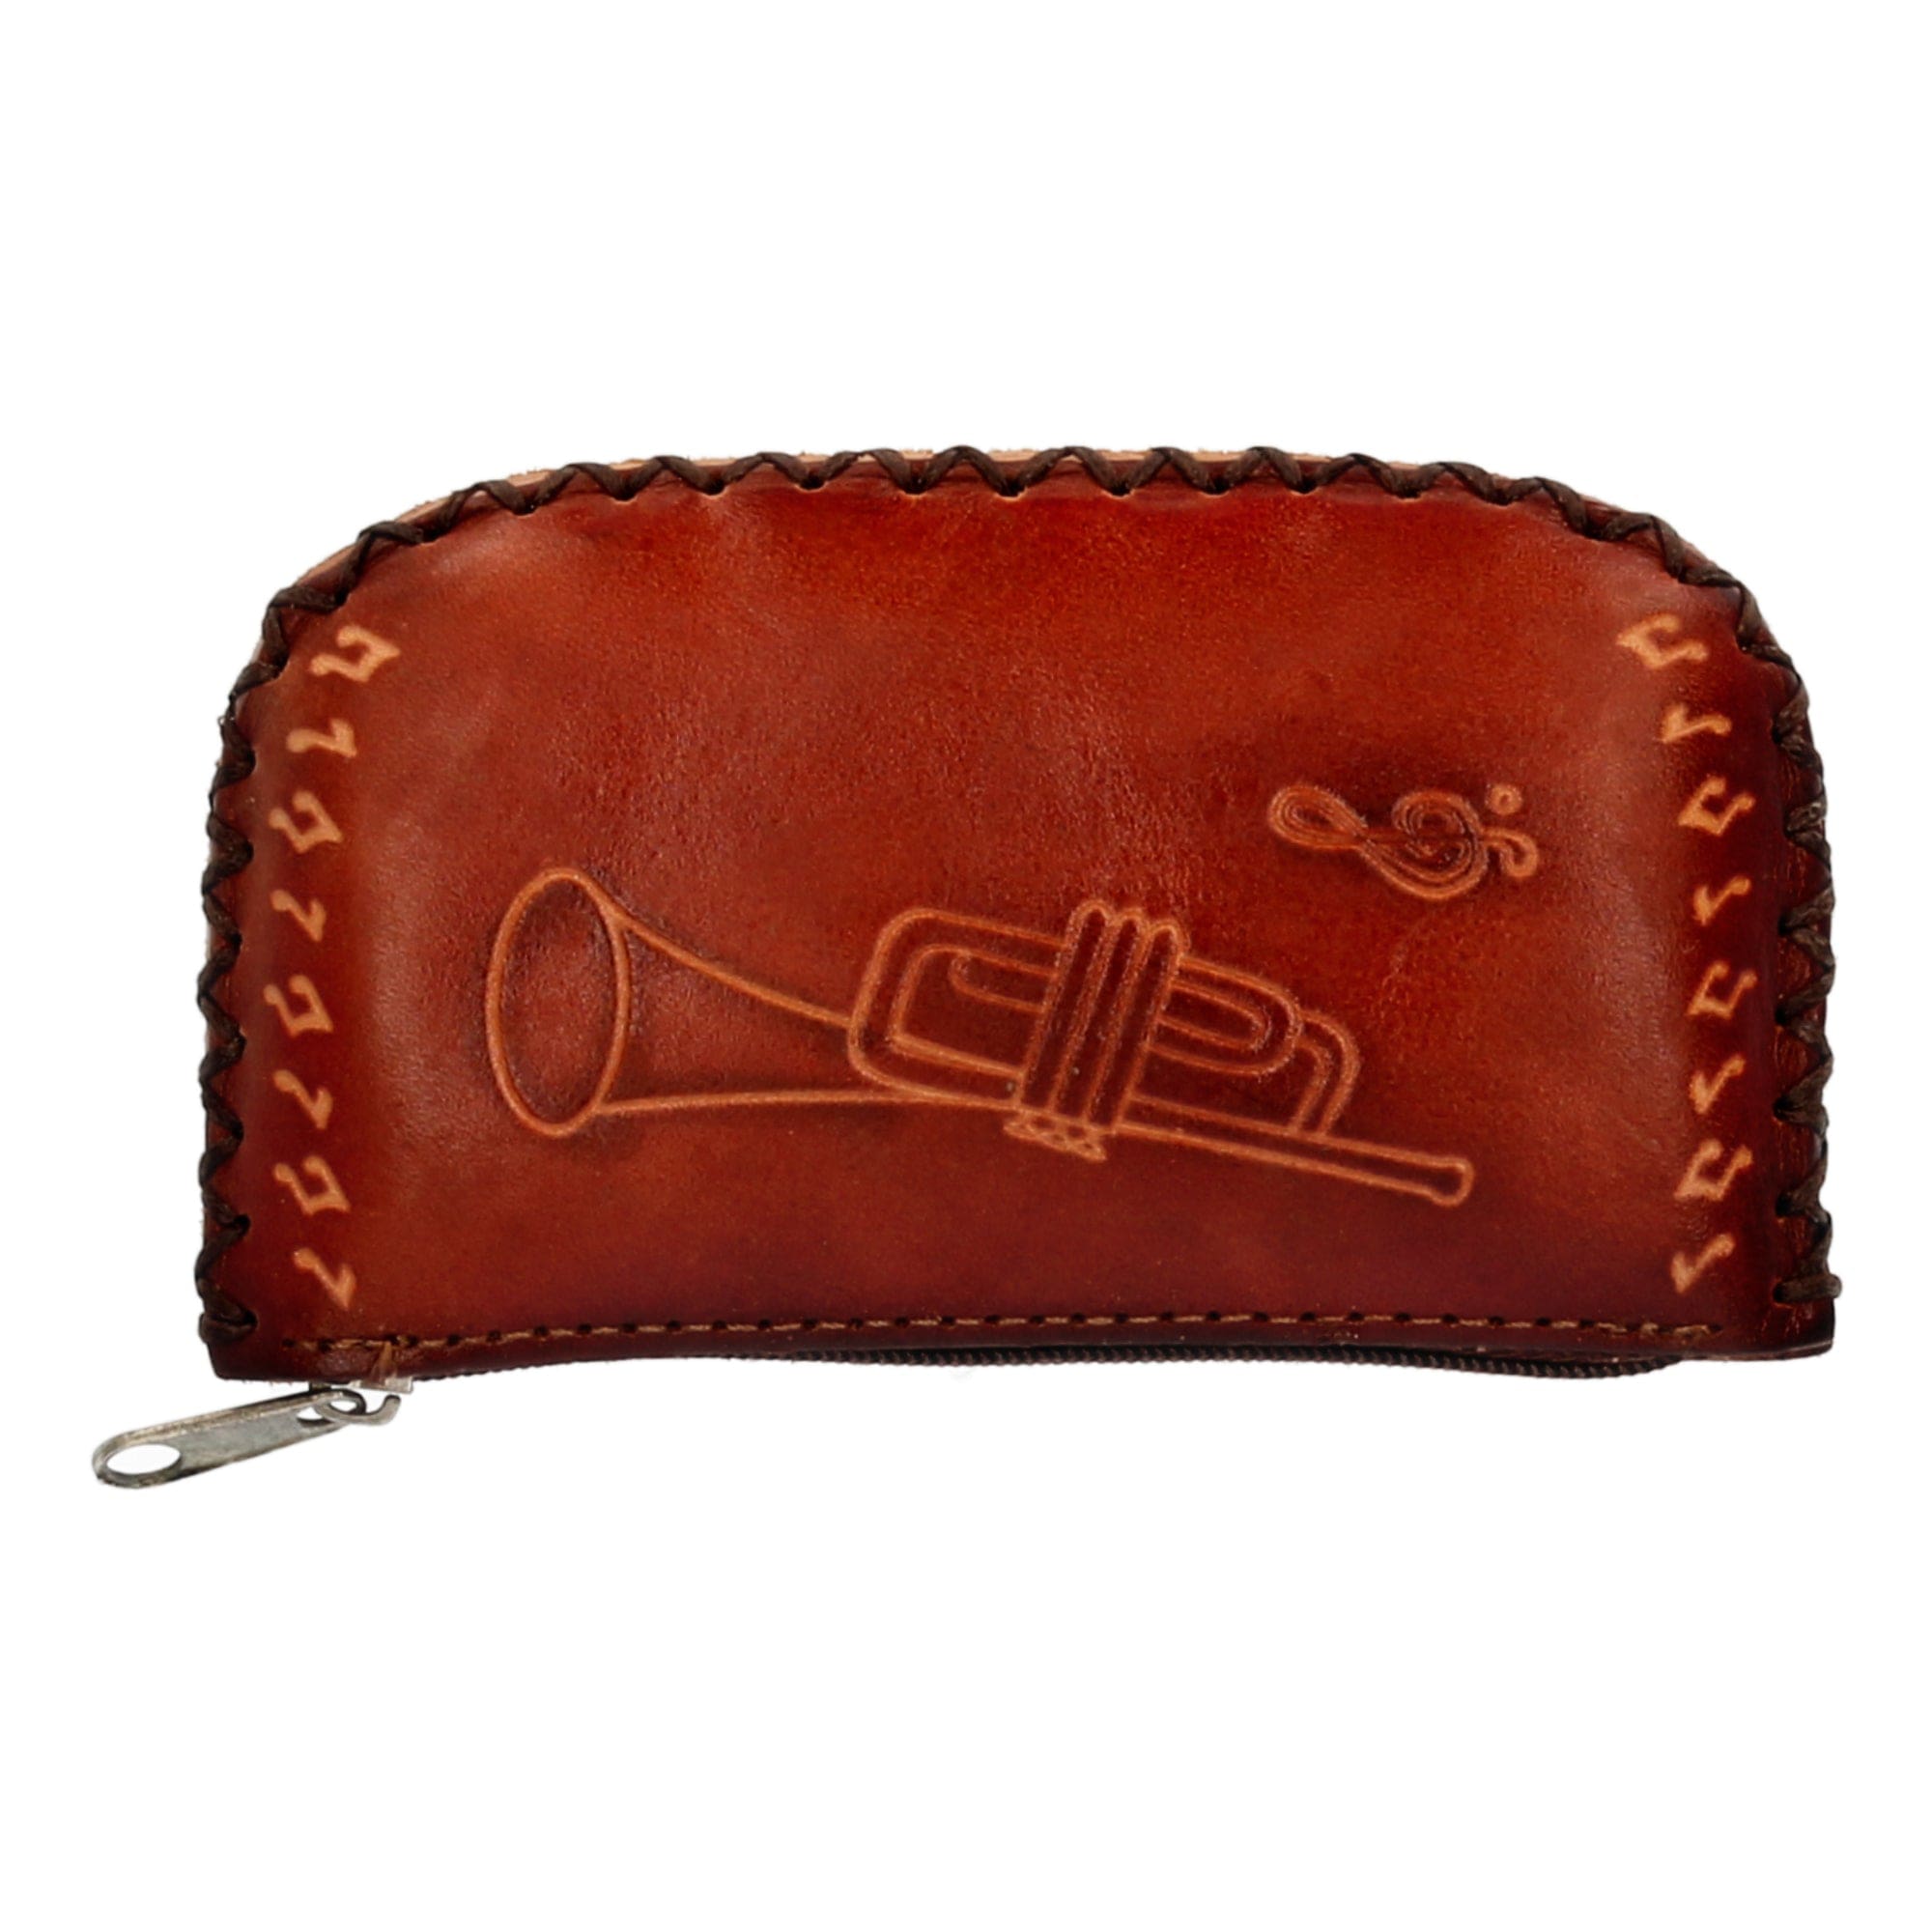 Leather goods - Bag - Small leather goods